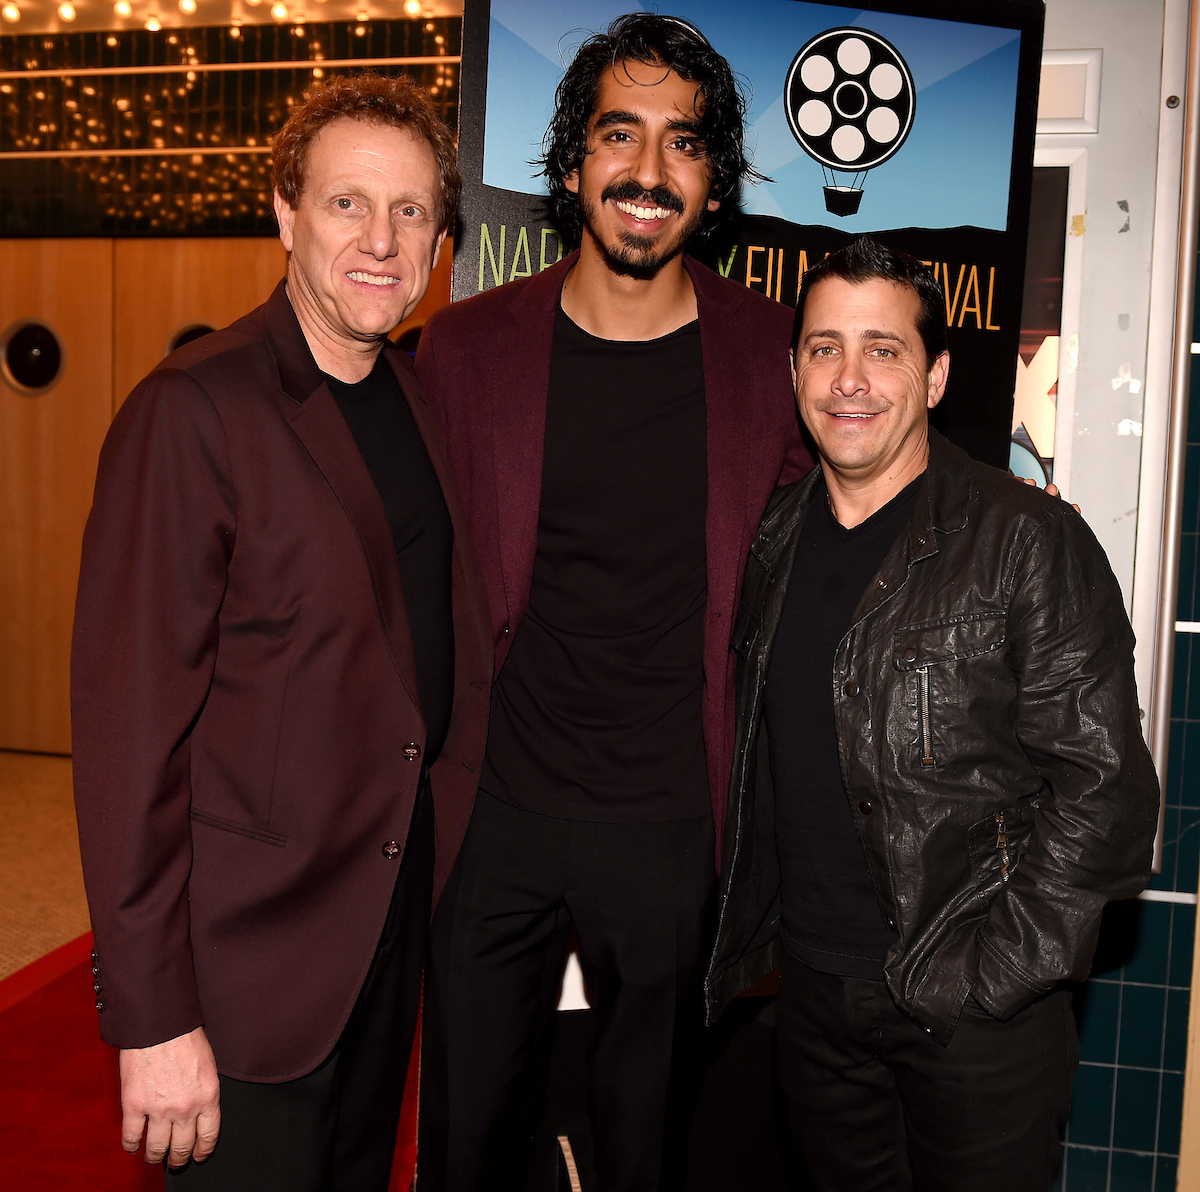 NAPA, CA - NOVEMBER 9: Napa Valley Film Festival Co-Founder Marc Lhormer, actor Dev Patel, and The Weinstein Company President and COO David Glasser attend the opening night screening and Q&A for The Weinstein Company's "Lion" at the Uptown Theatre during the 2016 Napa Valley Film Festival on November 9, 2016 in Napa, California. (Photo by Frank Micelotta/PictureGroup)